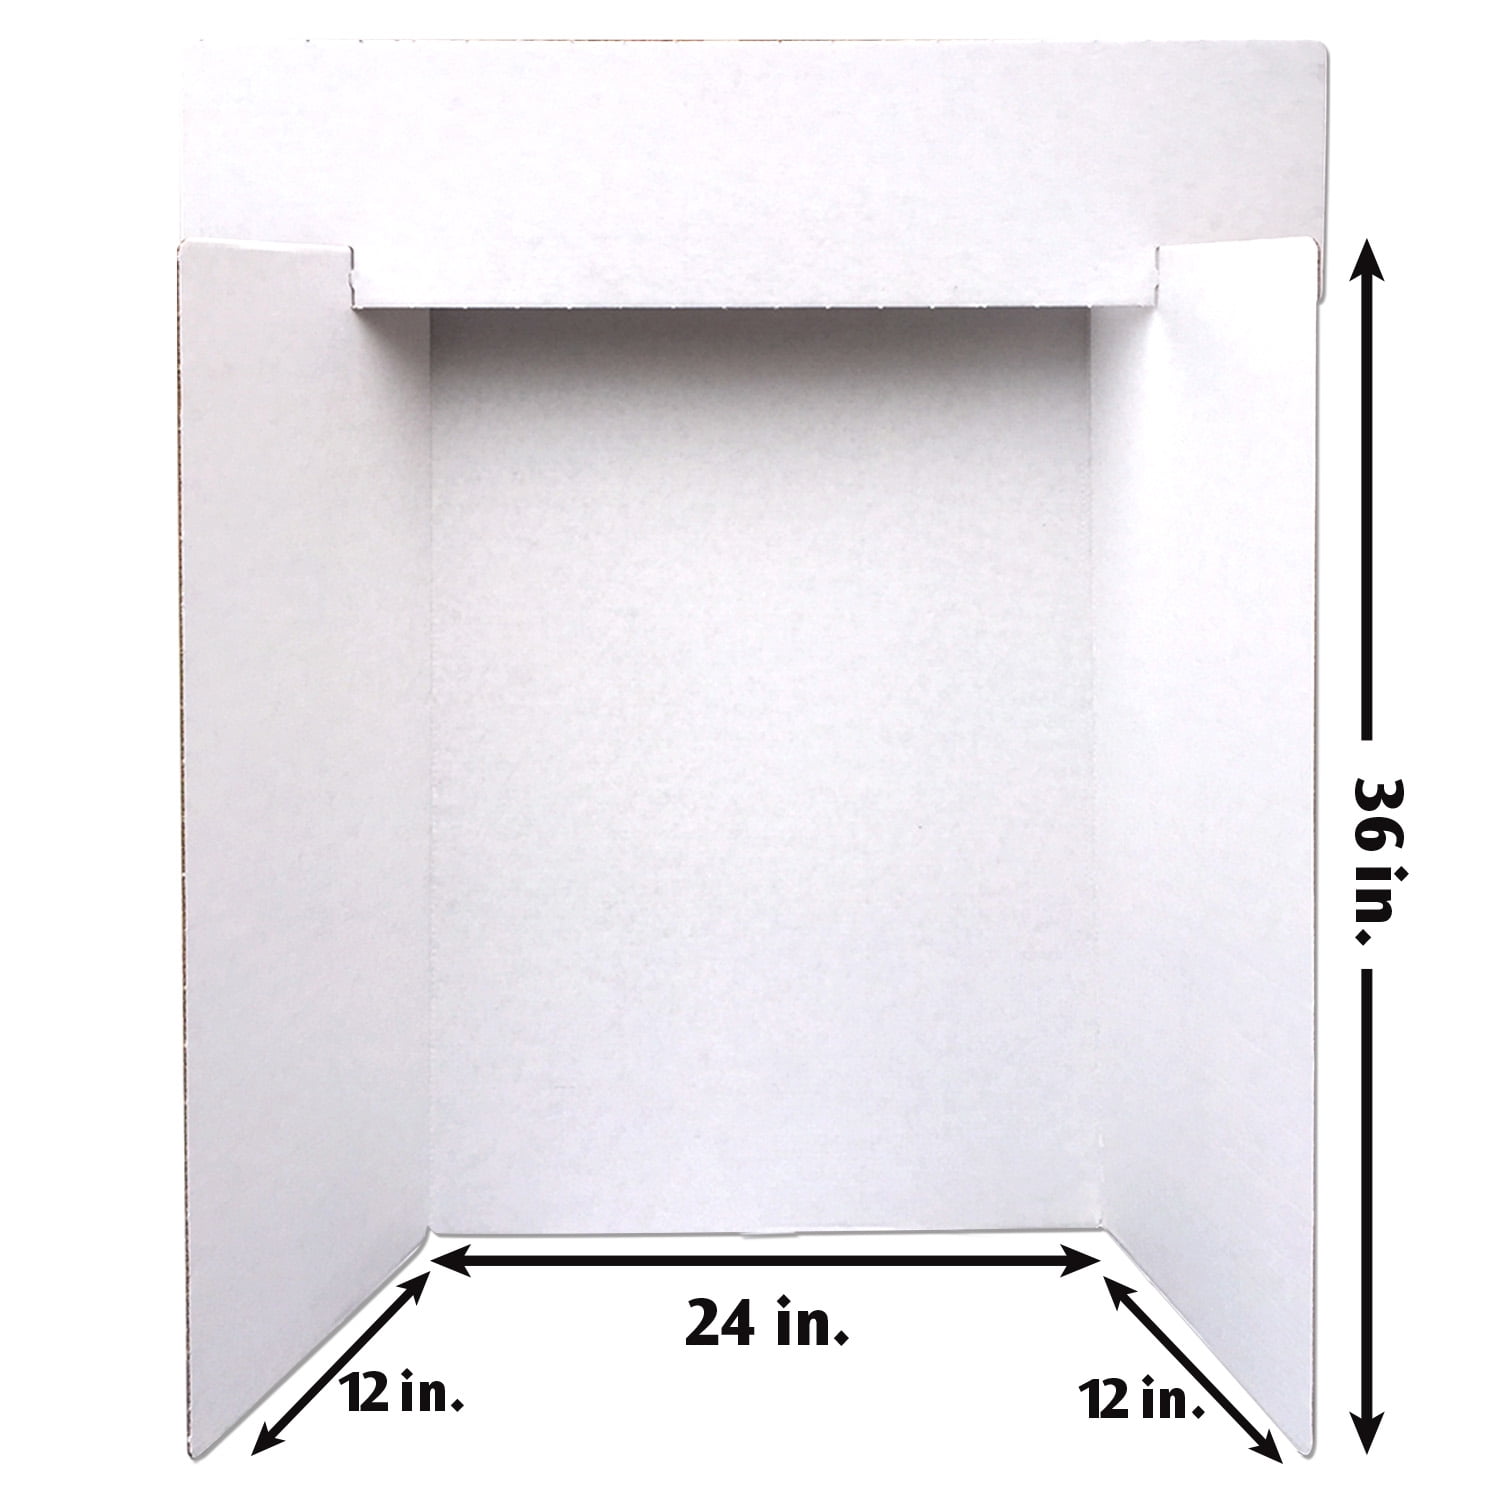 Two Cool Tri-Fold Poster Board, 24 x 36, White/White - Reliable Paper